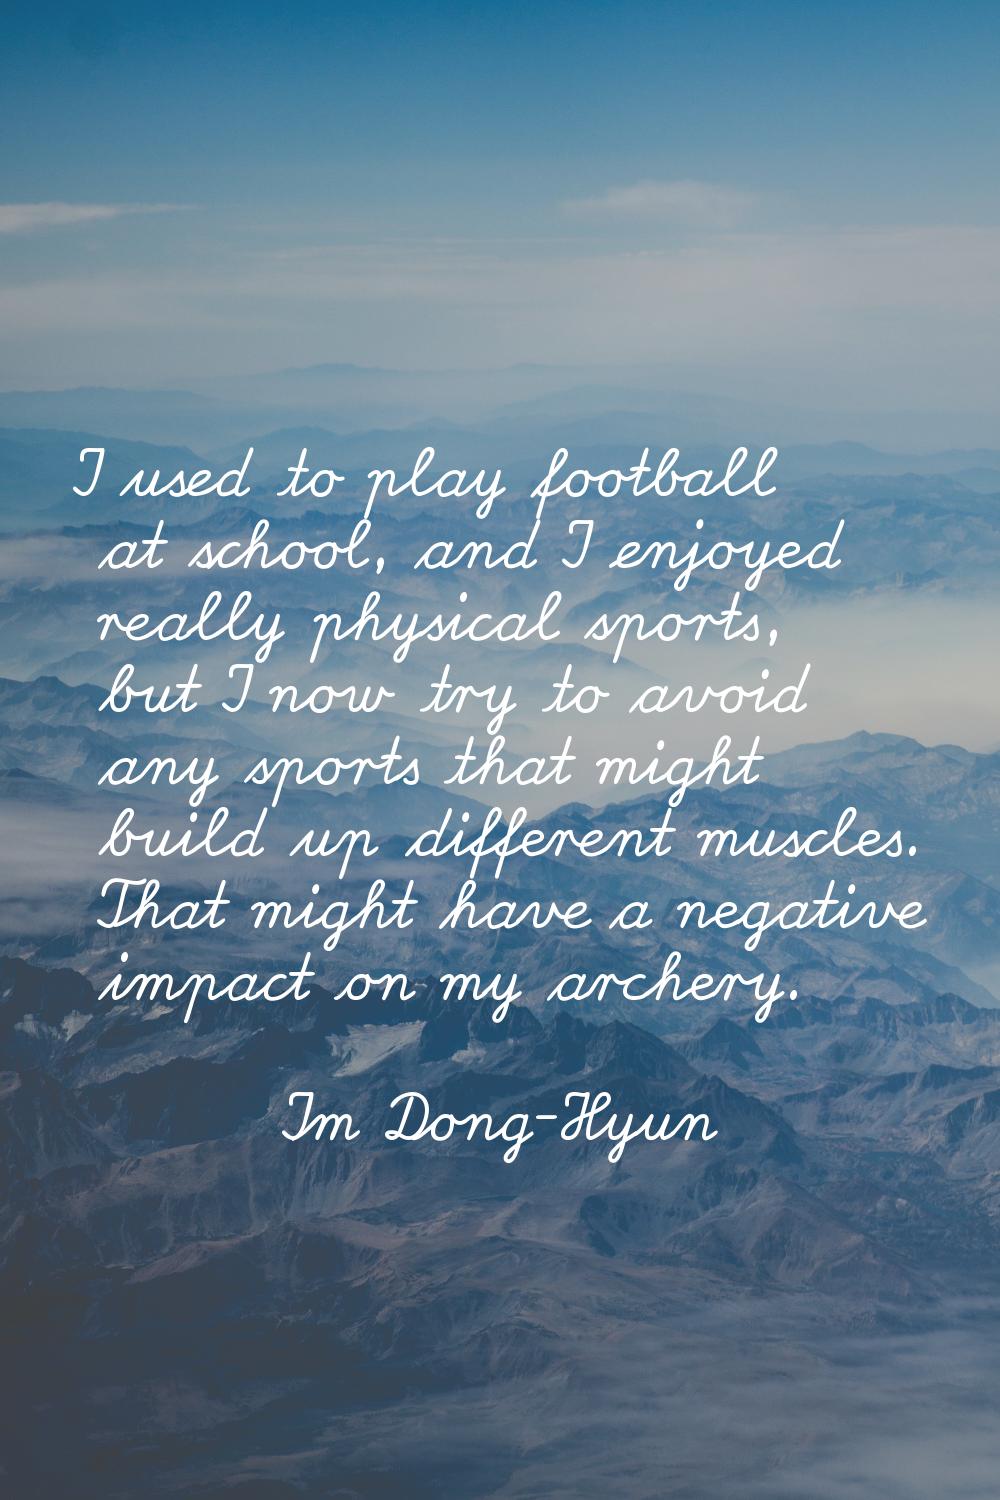 I used to play football at school, and I enjoyed really physical sports, but I now try to avoid any